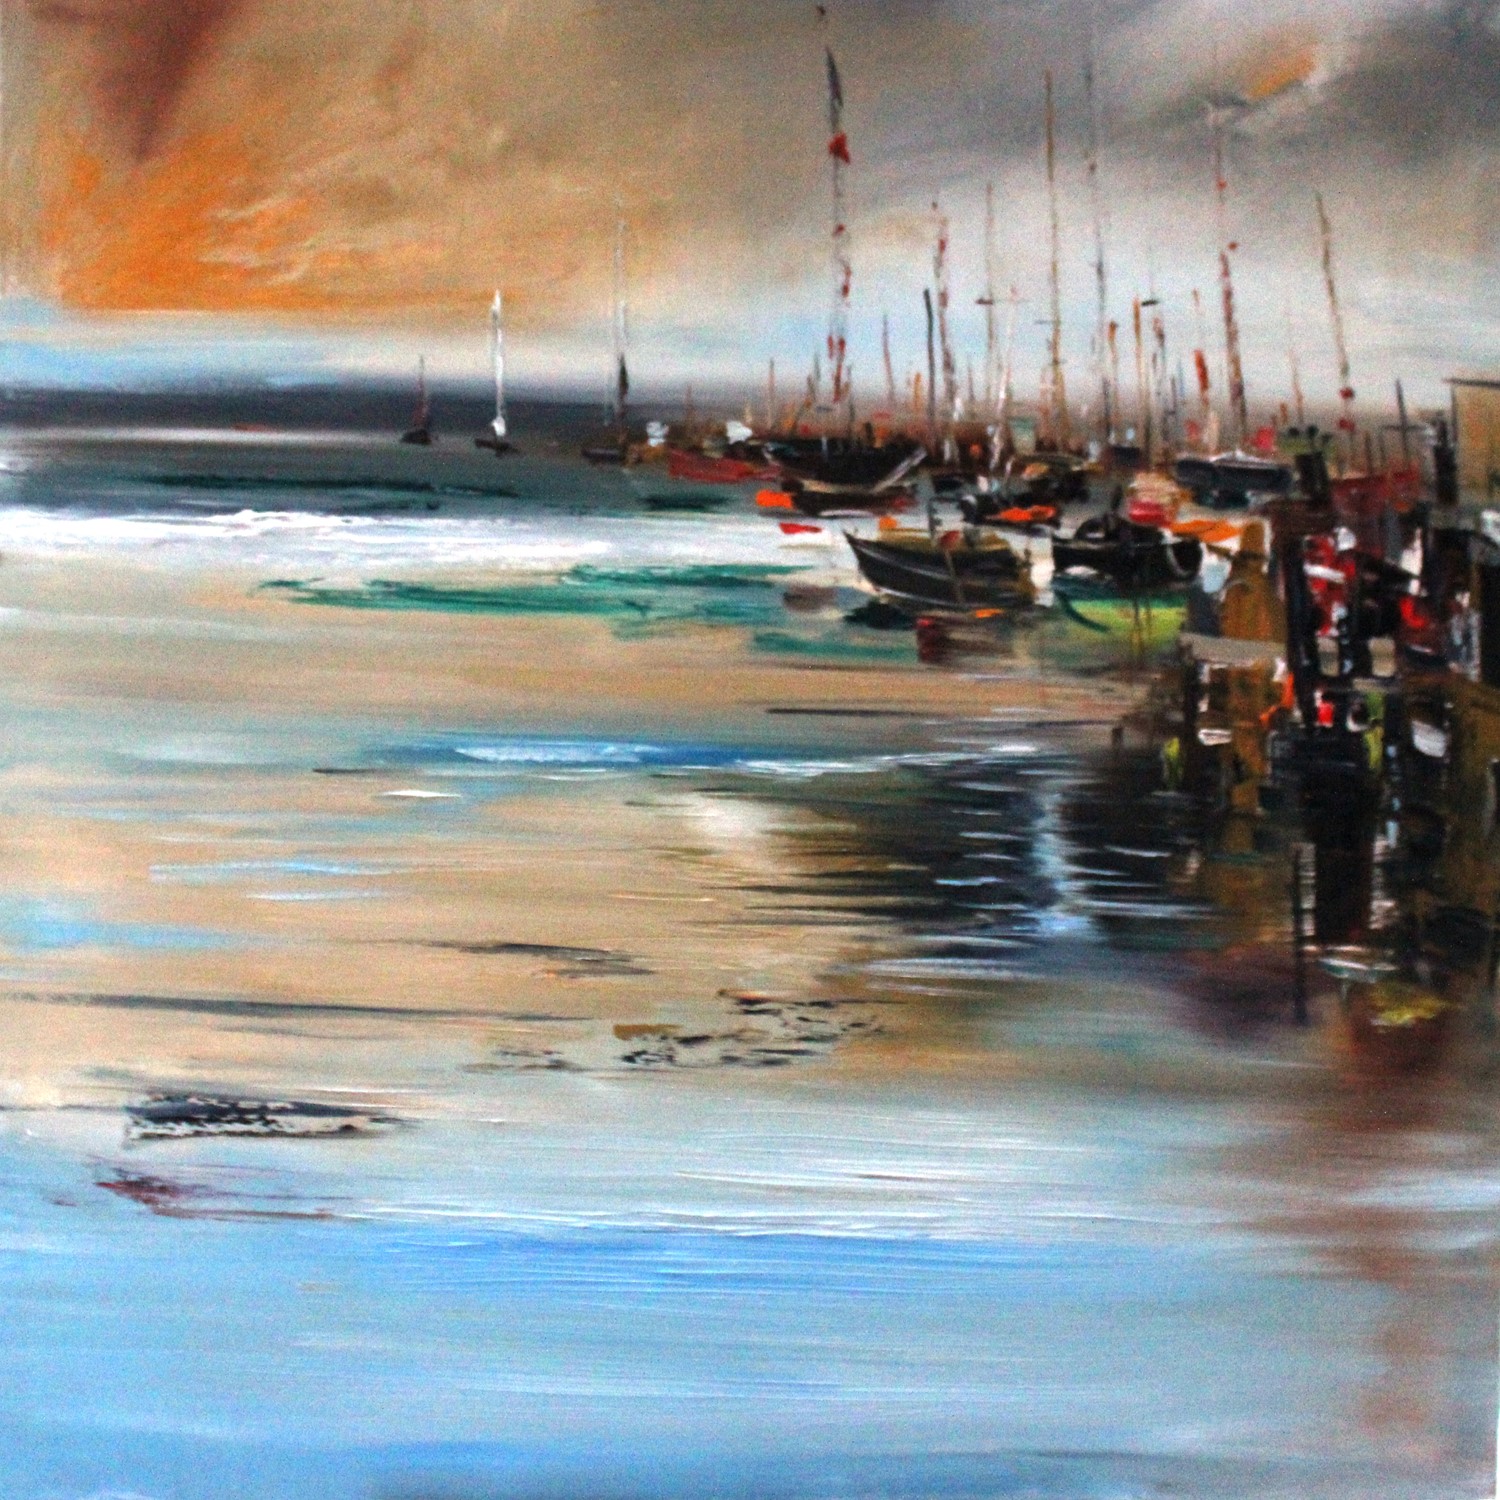 'Boats in The Bay' by artist Rosanne Barr